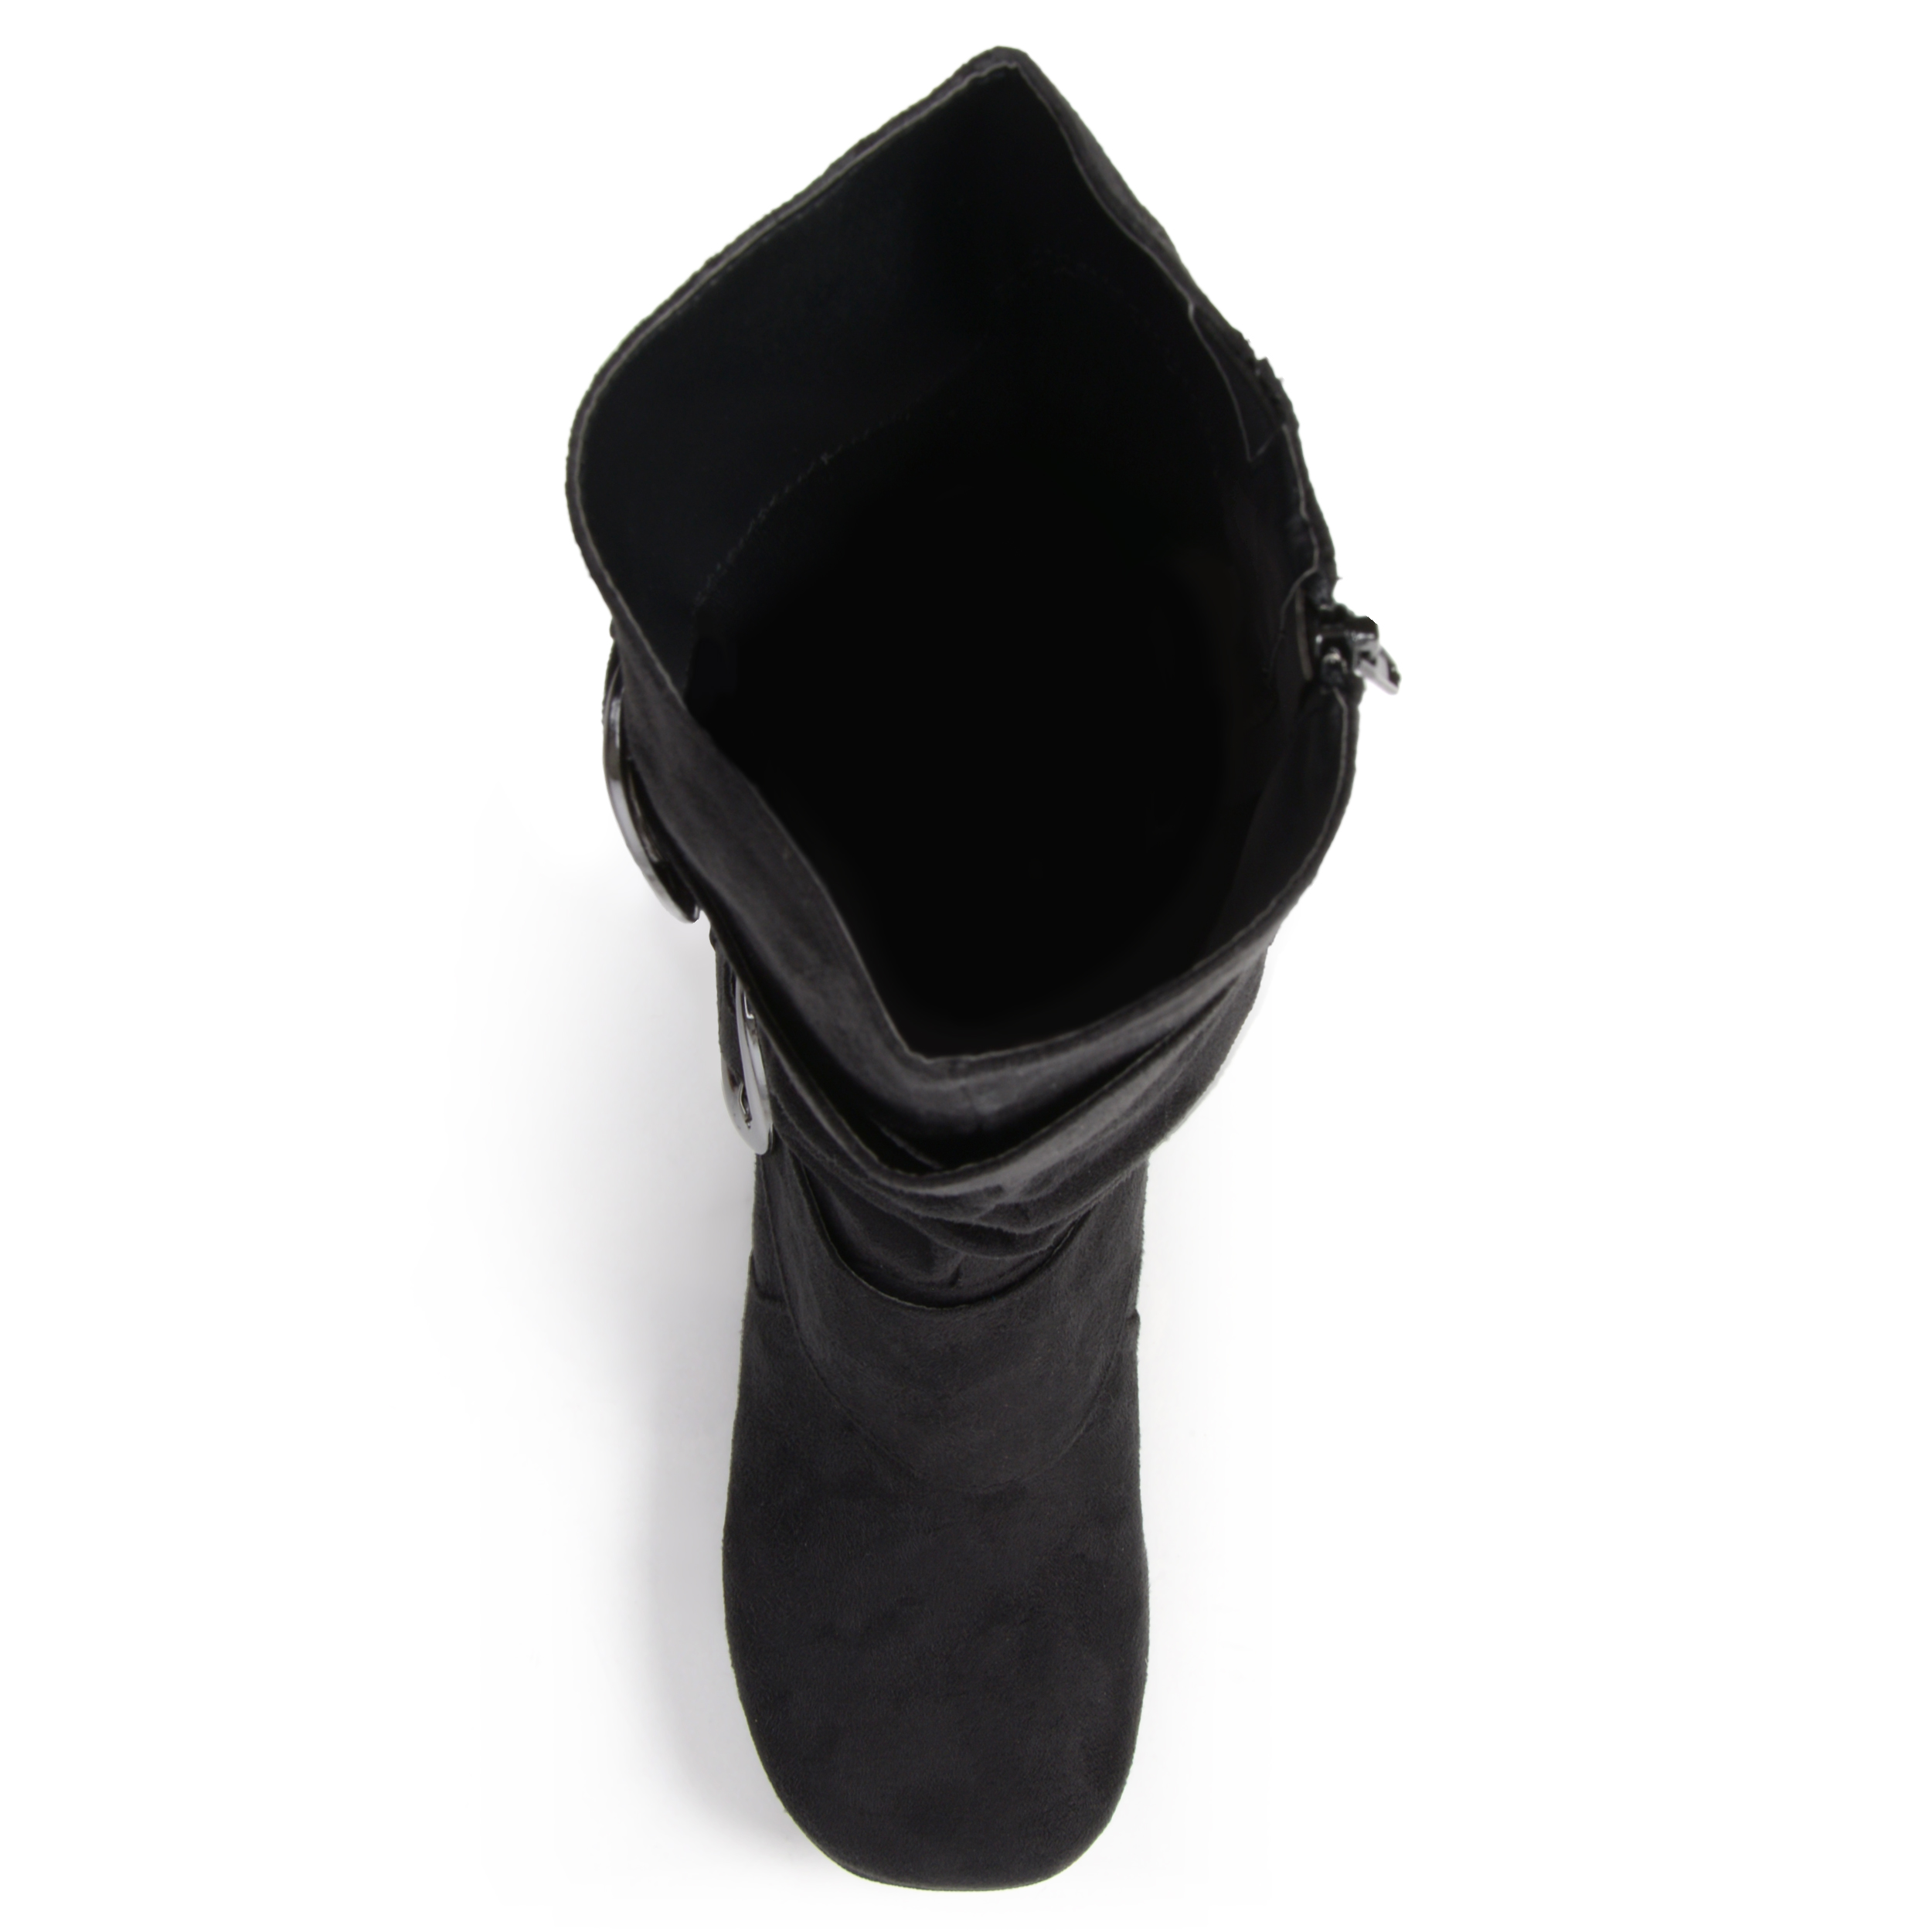 Women's Wide-Calf Buckle Knee-High Slouch Microsuede Boot - image 5 of 8